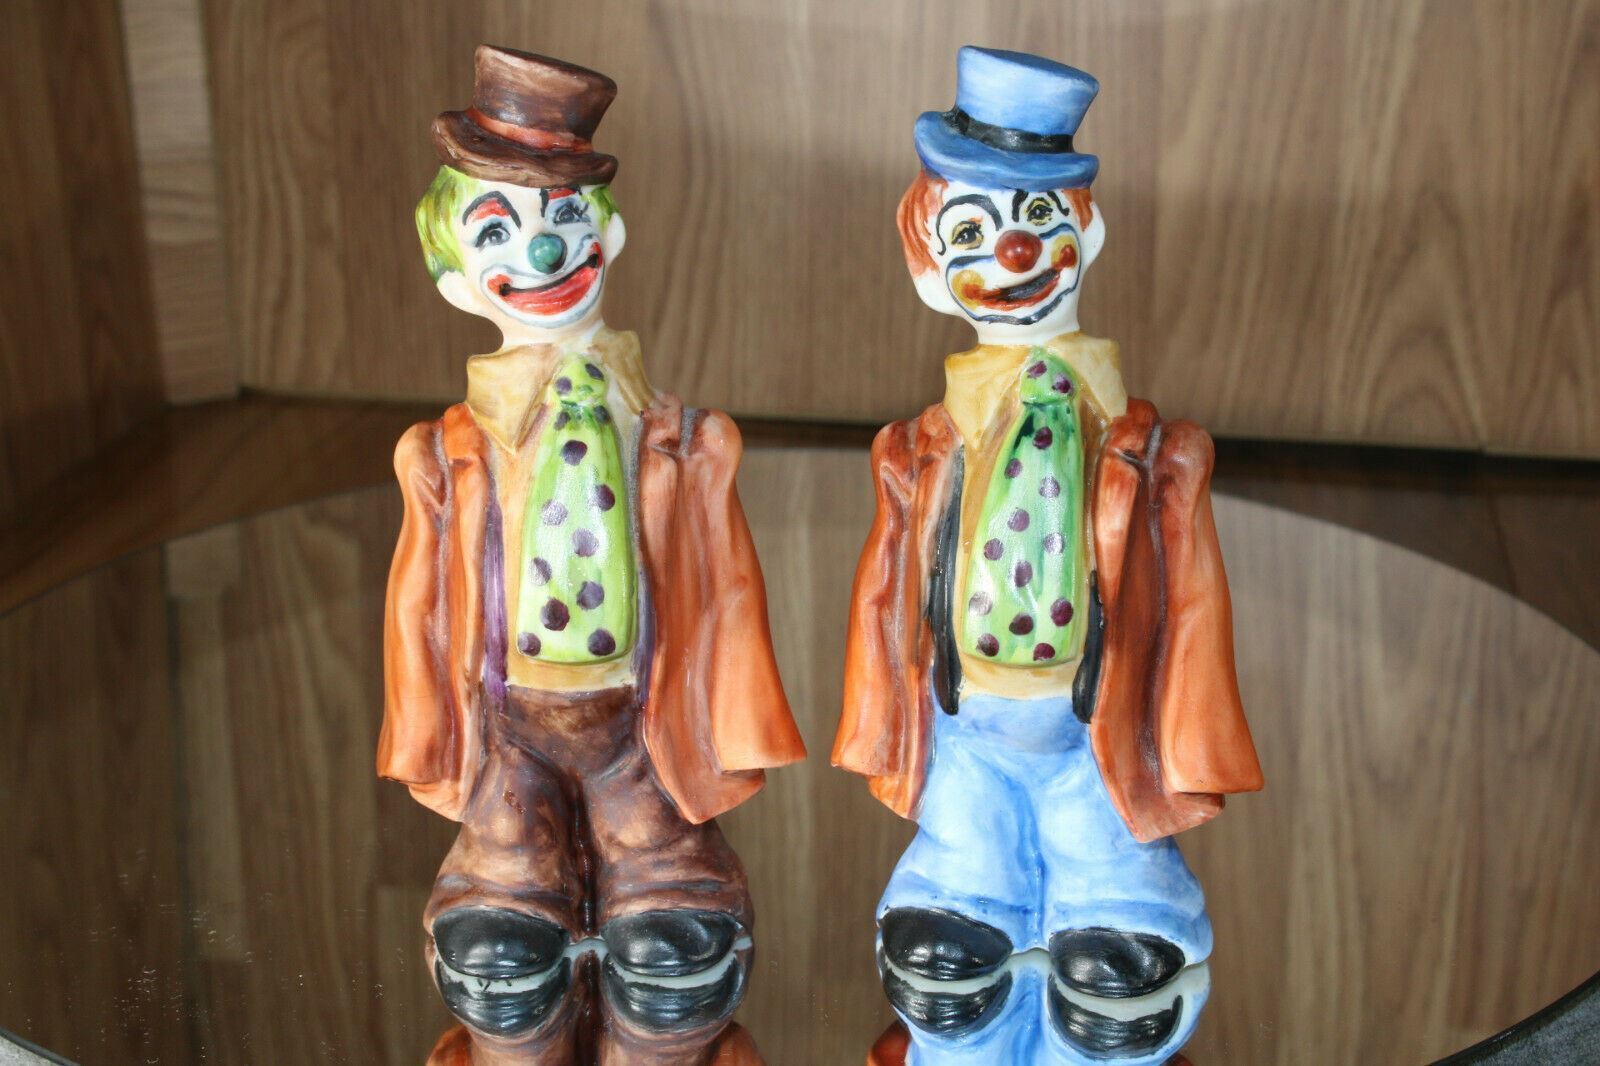 Vintage 1970s Hand Painted Ceramic Clown Figurines Set of 2 signed 